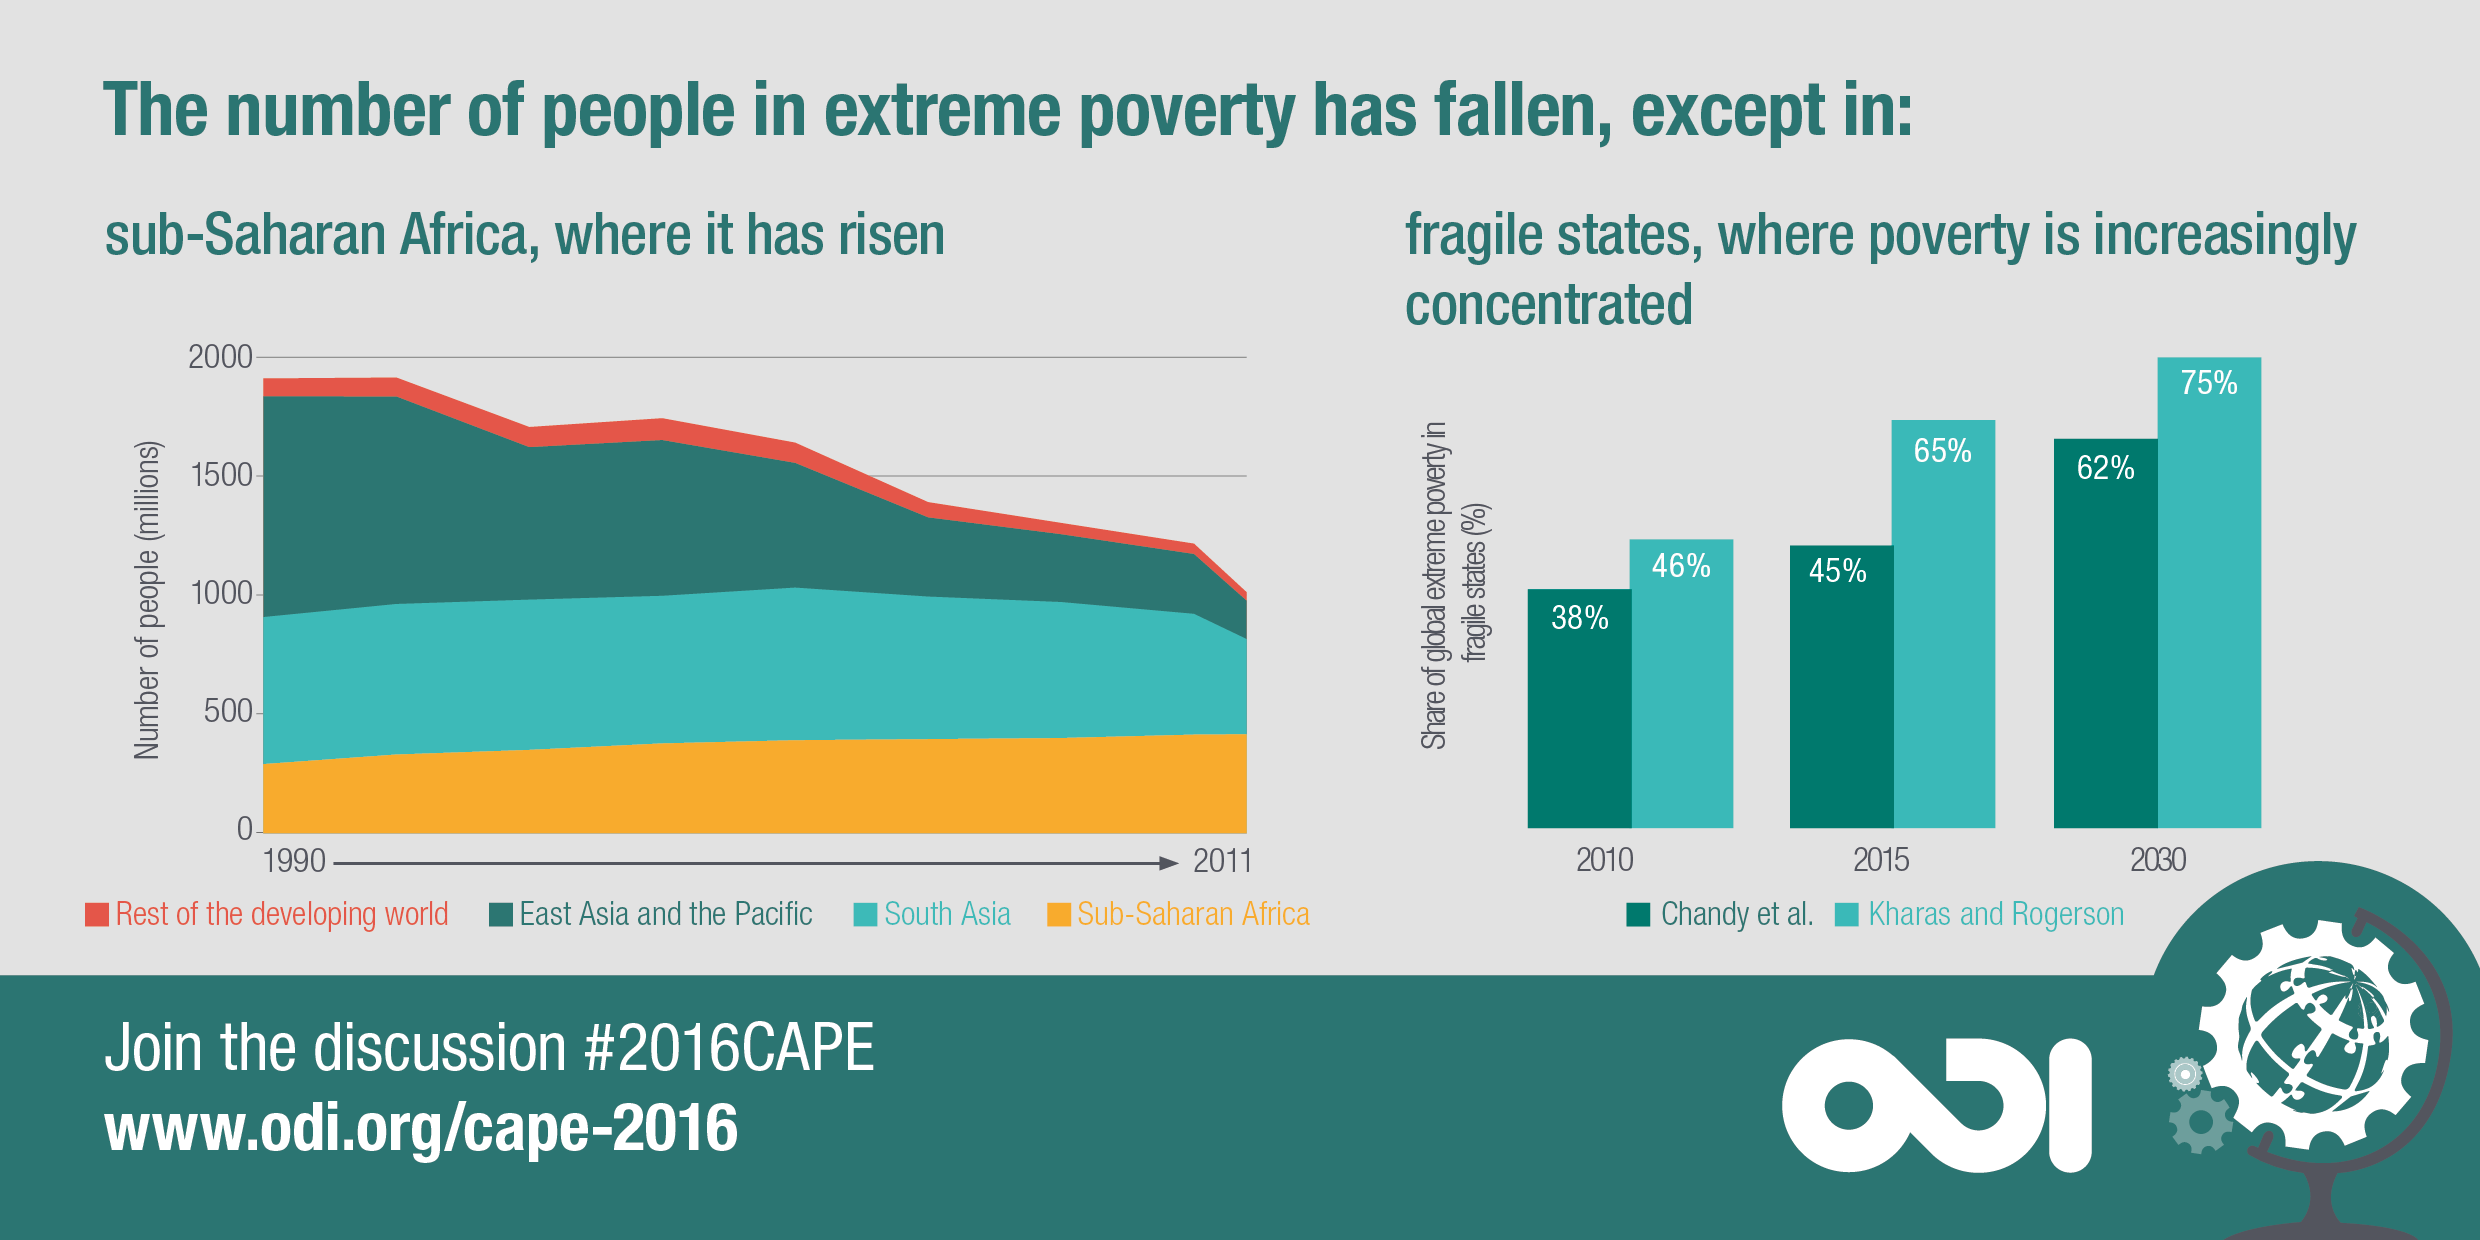 The number of people living in extreme poverty has fallen. Except in sub-Saharan Africa, where it has risen, and in fragile states, where poverty is increasingly concentrated.